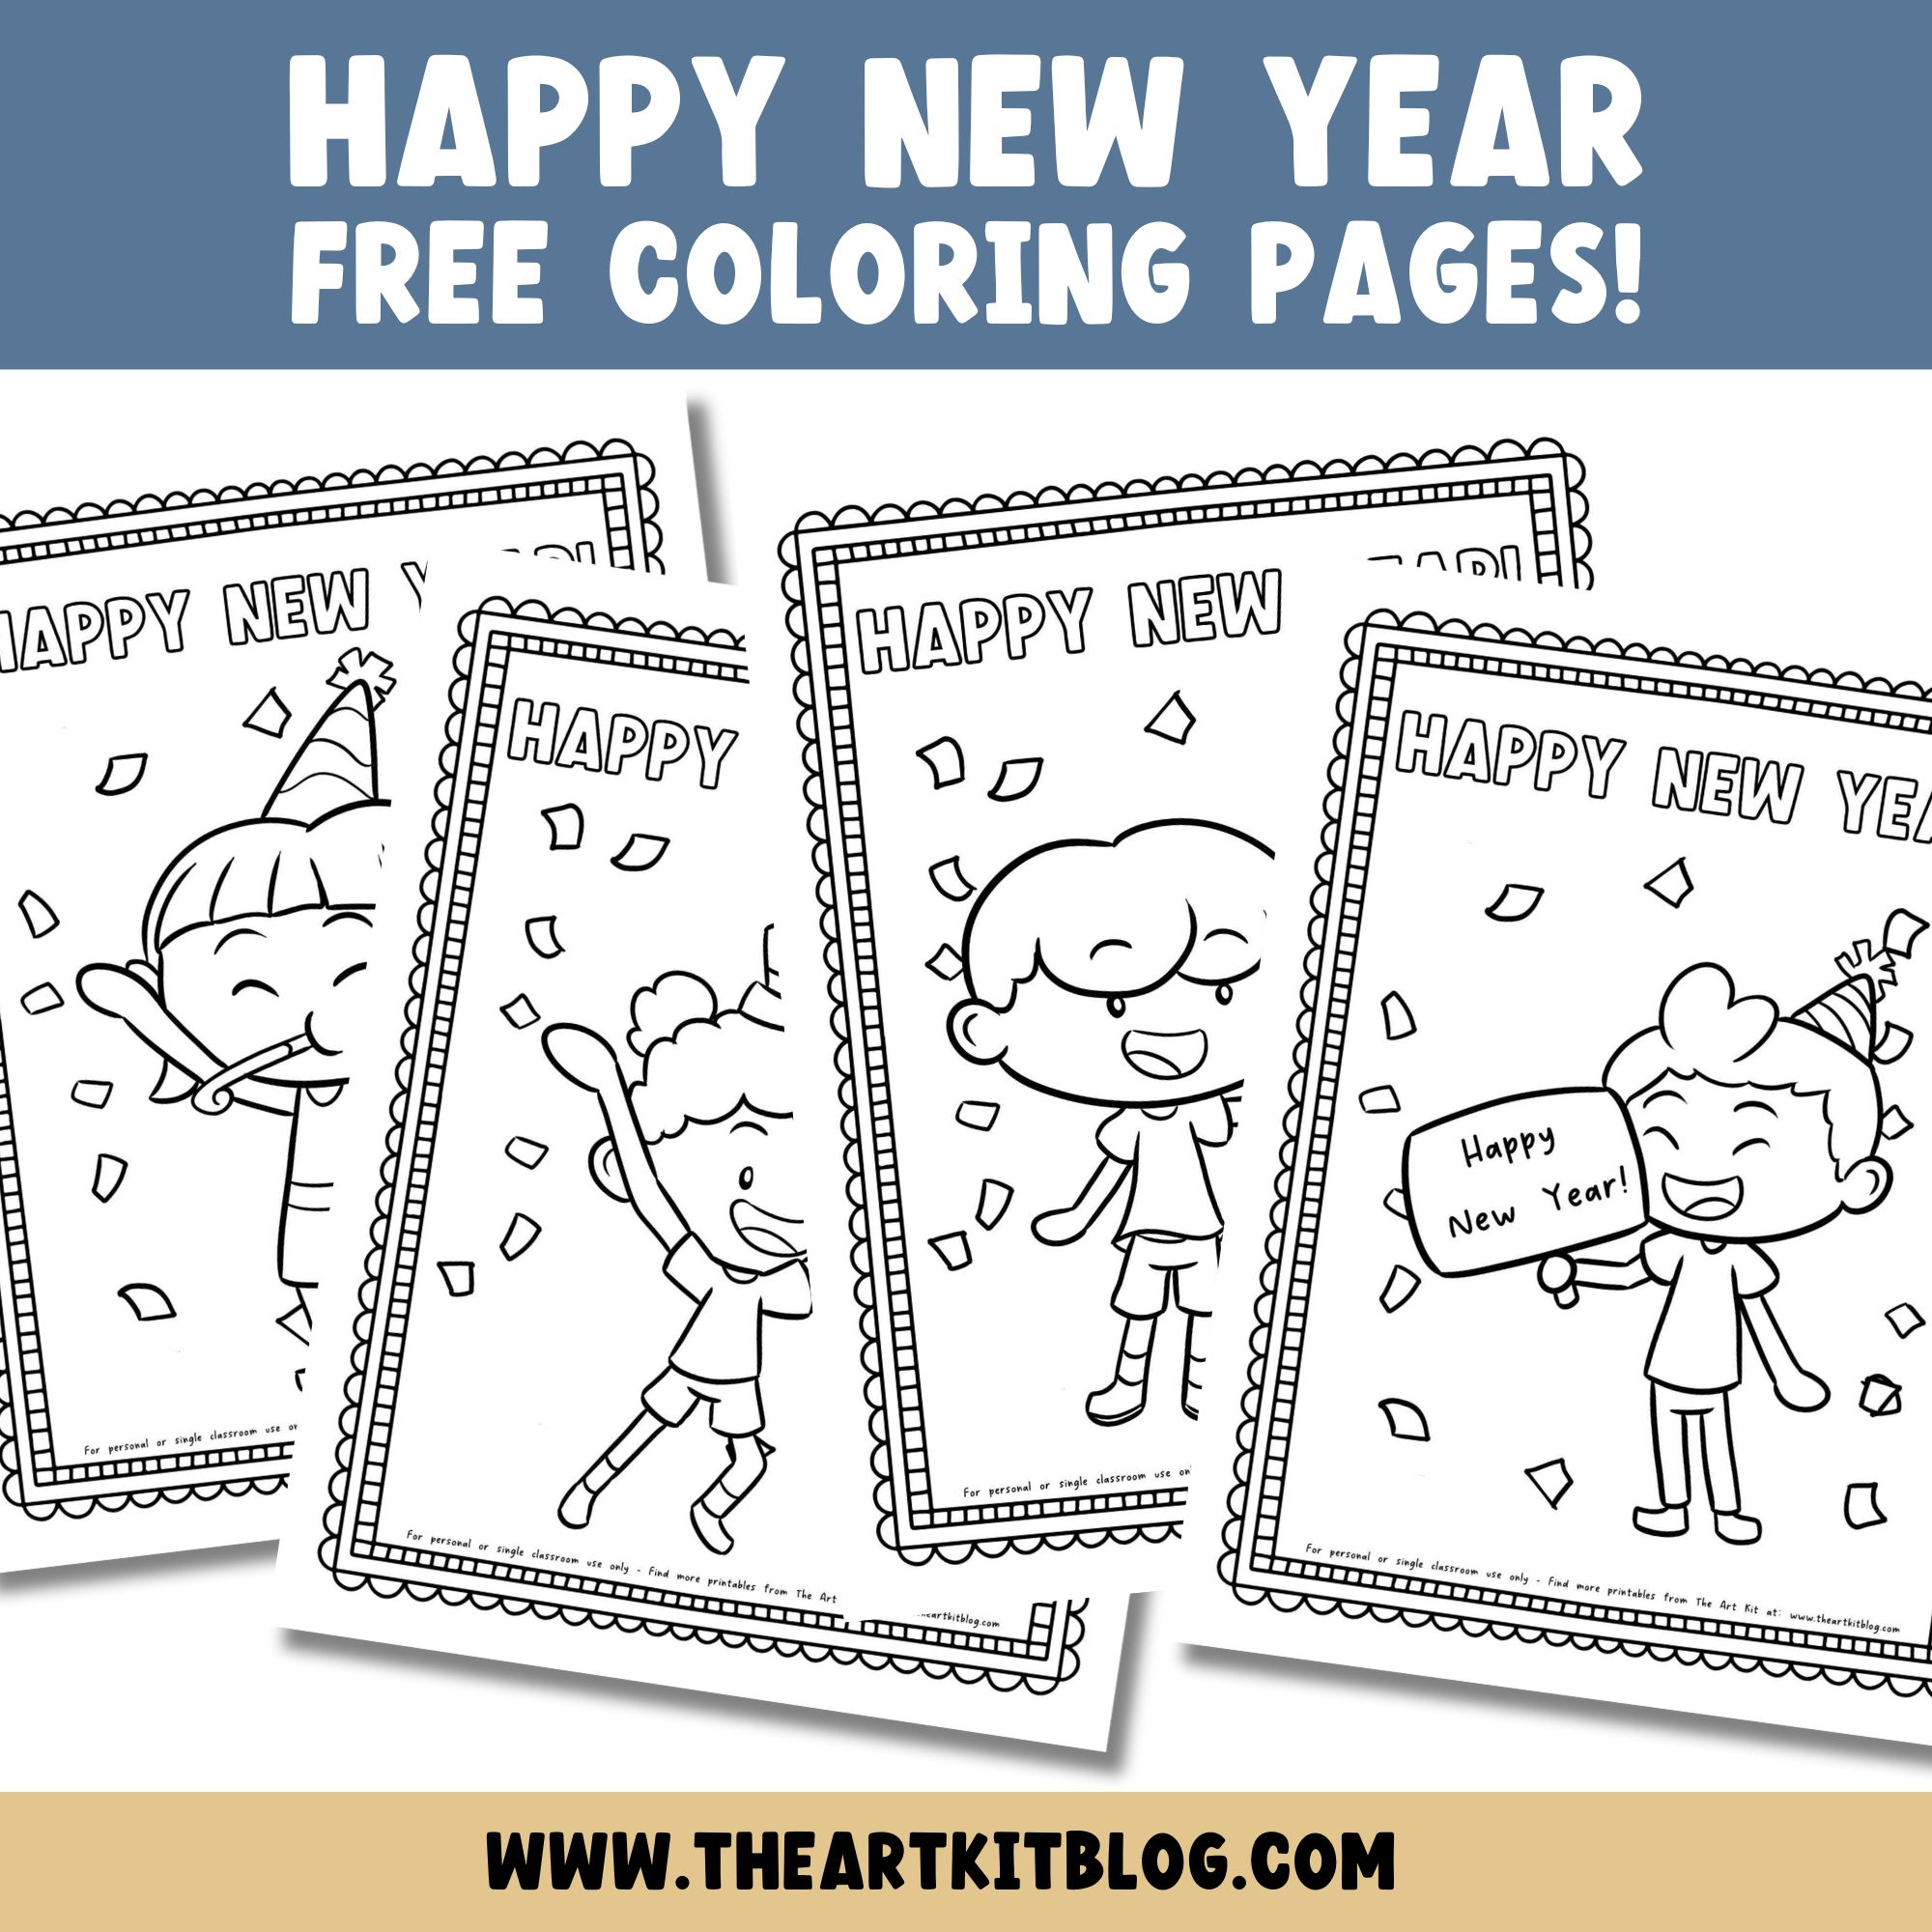 Happy new year kids coloring pages free printables â the art kit